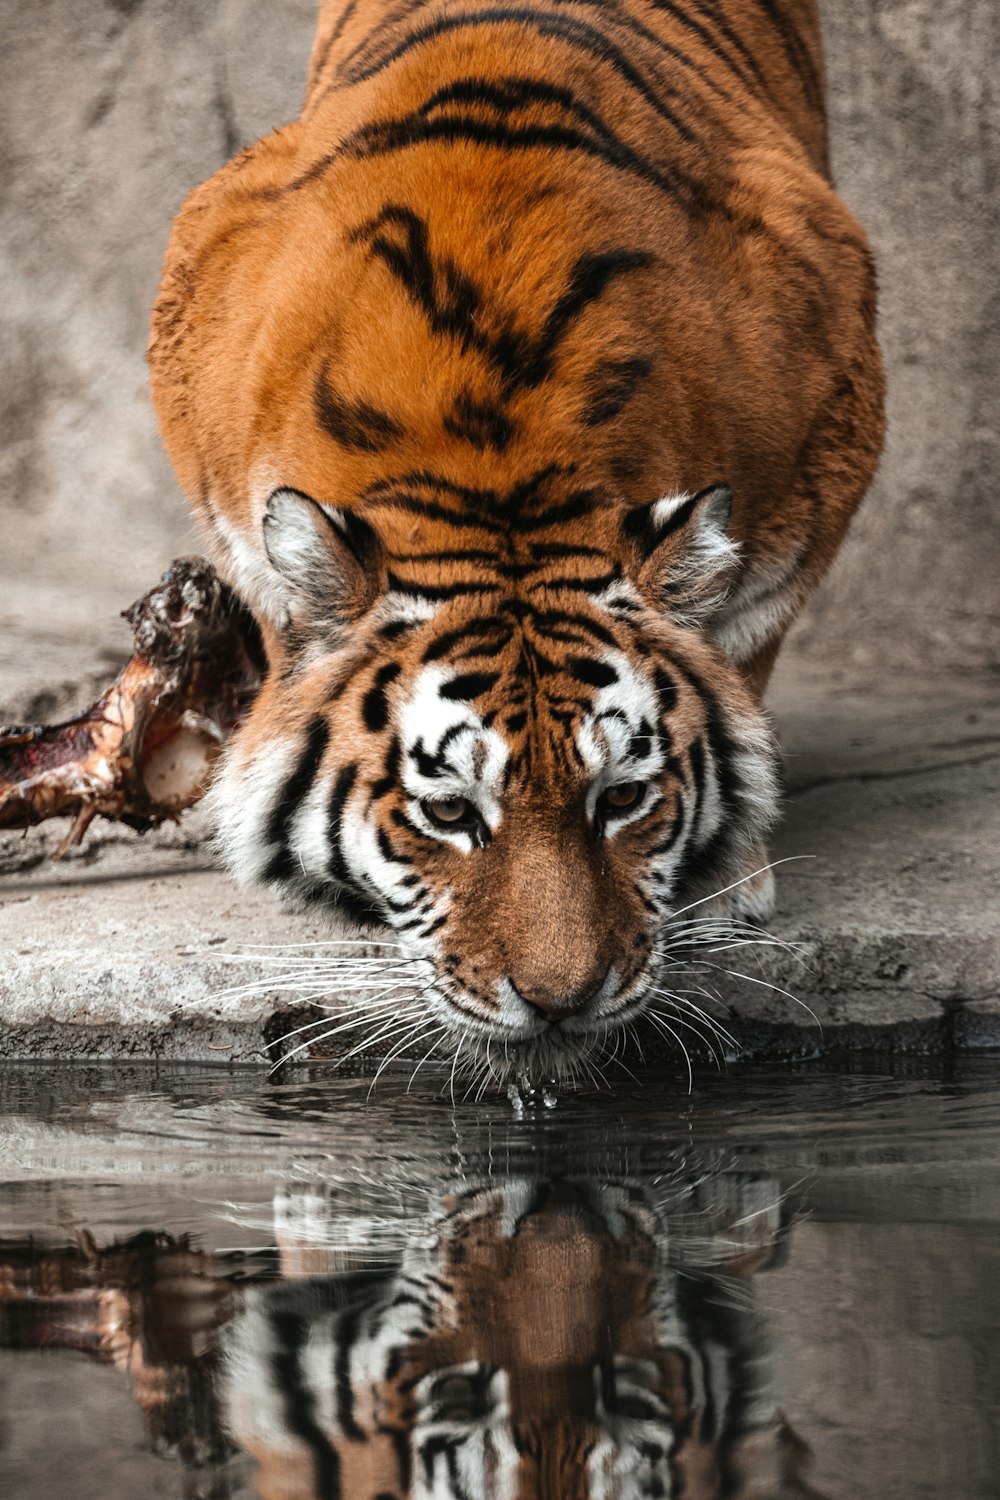 a tiger drinking water from a pool of water